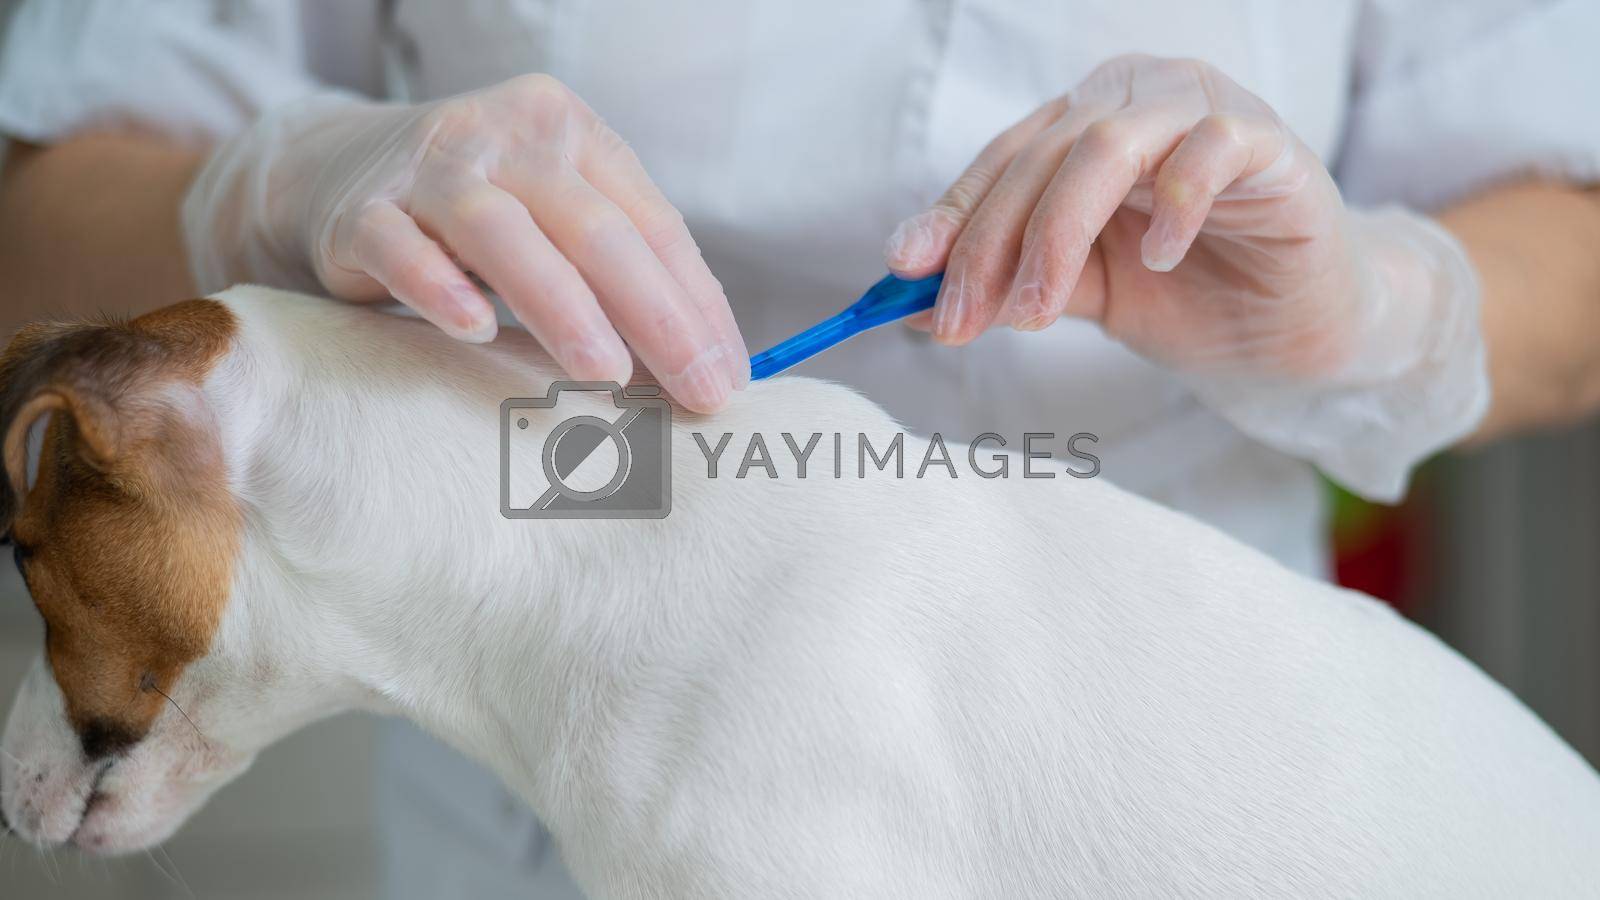 Royalty free image of A veterinarian treats a dog from parasites by dripping medicine on the withers. by mrwed54